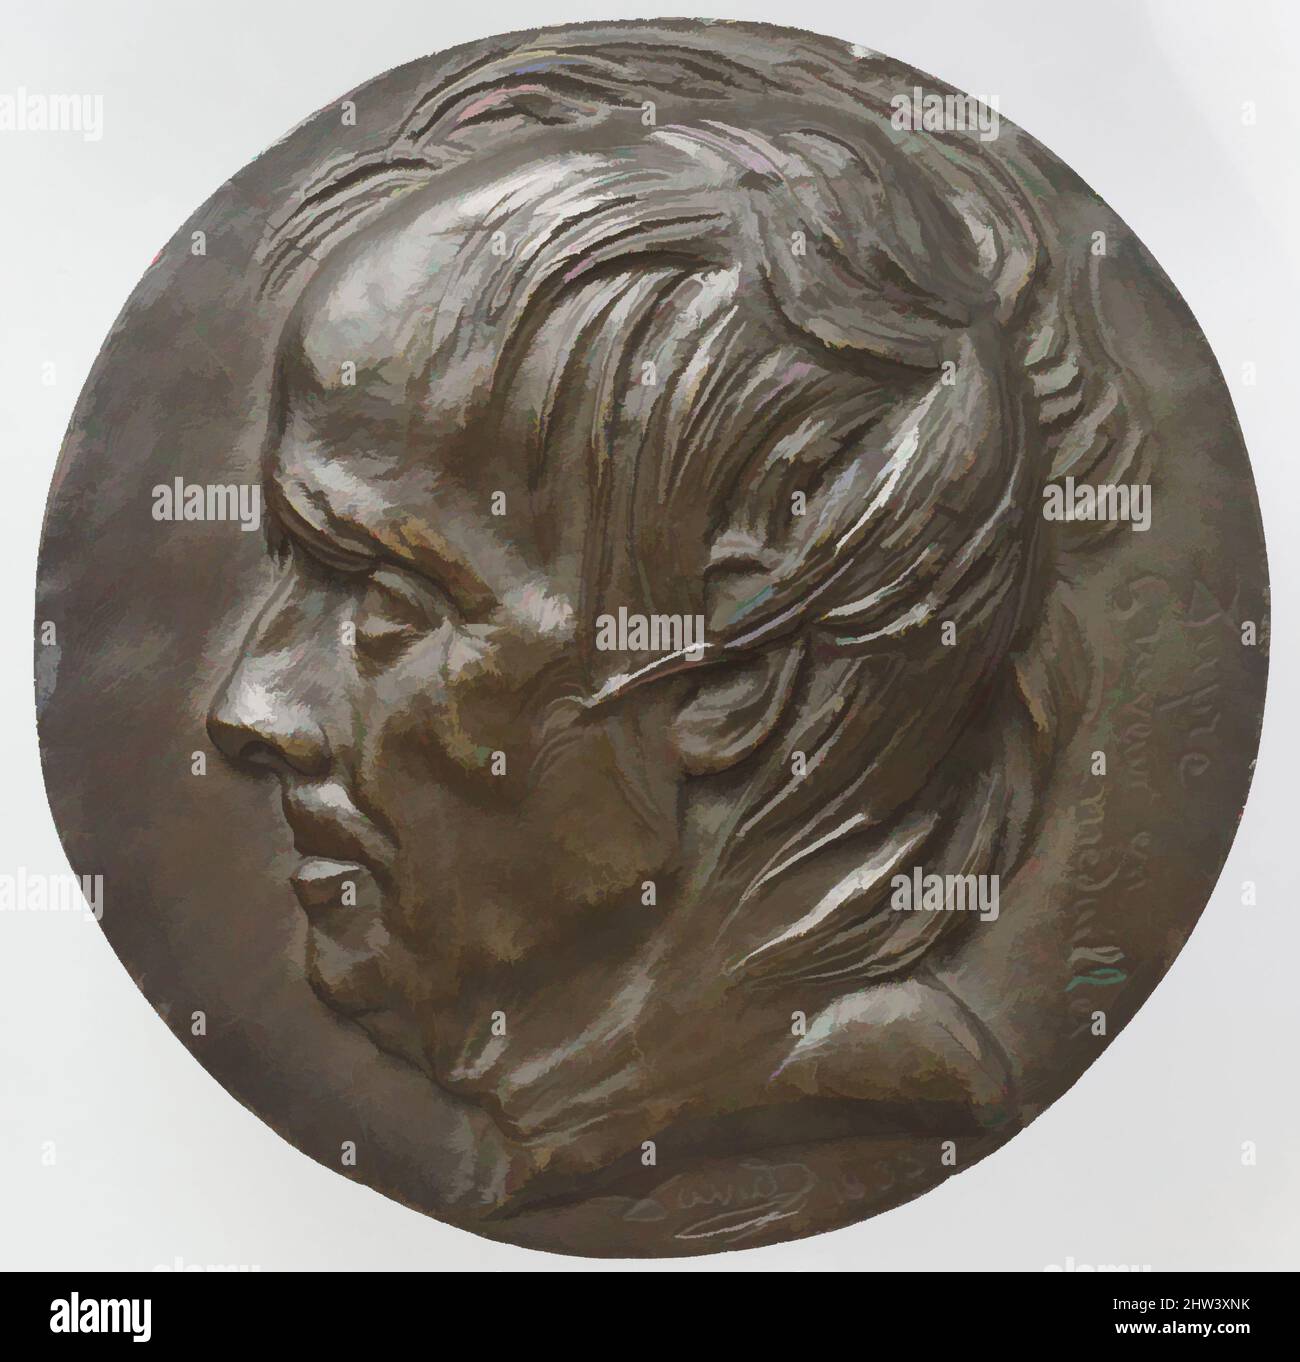 Art inspired by Augustin Dupré (1748–1833), modeled 1833, cast 1838–44, French, Bronze, Diameter: 5 7/8 in. (14.9 cm), Medals and Plaquettes, Medalist: Pierre Jean David d'Angers (French, Angers 1788–1856 Paris), Augustin Dupré (1748–1833), portrayed the year of his death, was an, Classic works modernized by Artotop with a splash of modernity. Shapes, color and value, eye-catching visual impact on art. Emotions through freedom of artworks in a contemporary way. A timeless message pursuing a wildly creative new direction. Artists turning to the digital medium and creating the Artotop NFT Stock Photo